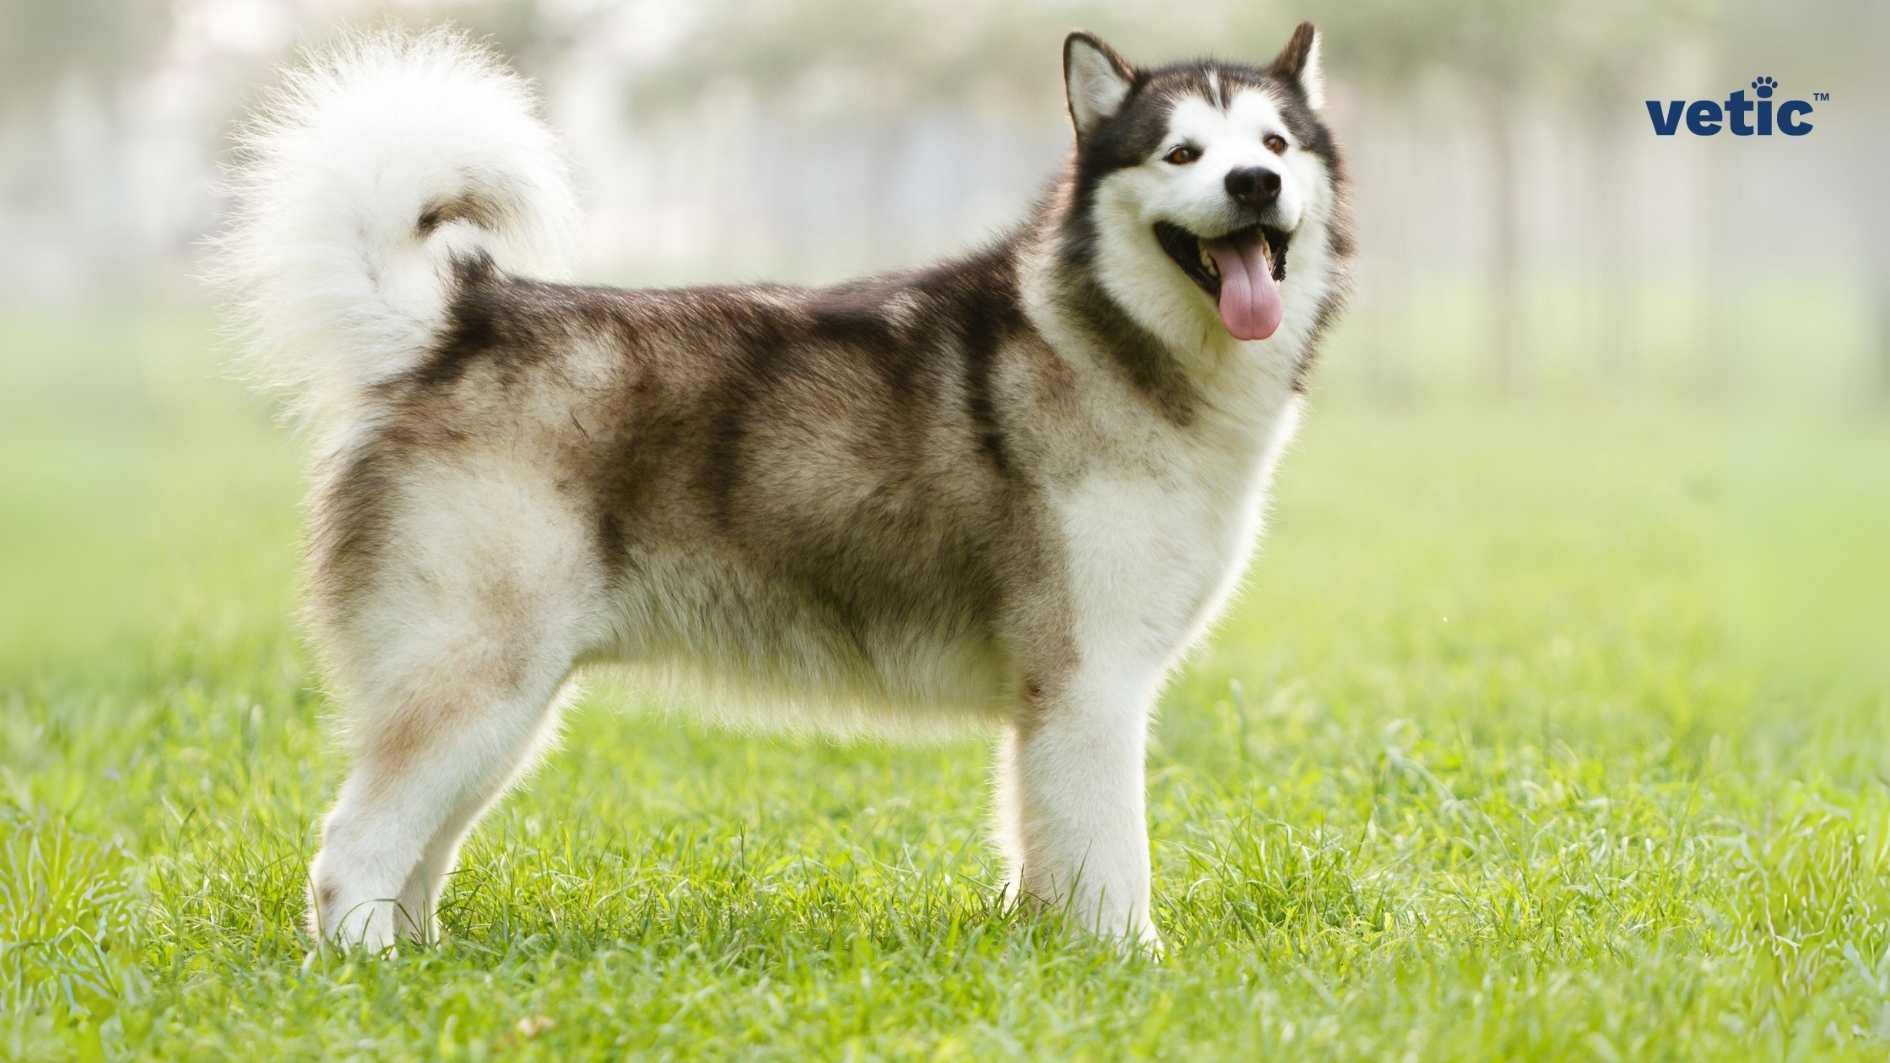 The image shows an Alaskan Malamute standing on a grassy field. The dog has a thick, double coat of fur, displaying shades of black, white, and grey. It has erect ears and a bushy tail that curls over its back. The dog’s eyes are not visible, but you can easily distinguish a Husky and Malamute; the former has blue eyes but a malamute always has brown eyes. The dog appears healthy and well-groomed, with its fur shiny and clean. There is a watermark “vetic” at the bottom right corner of the image.